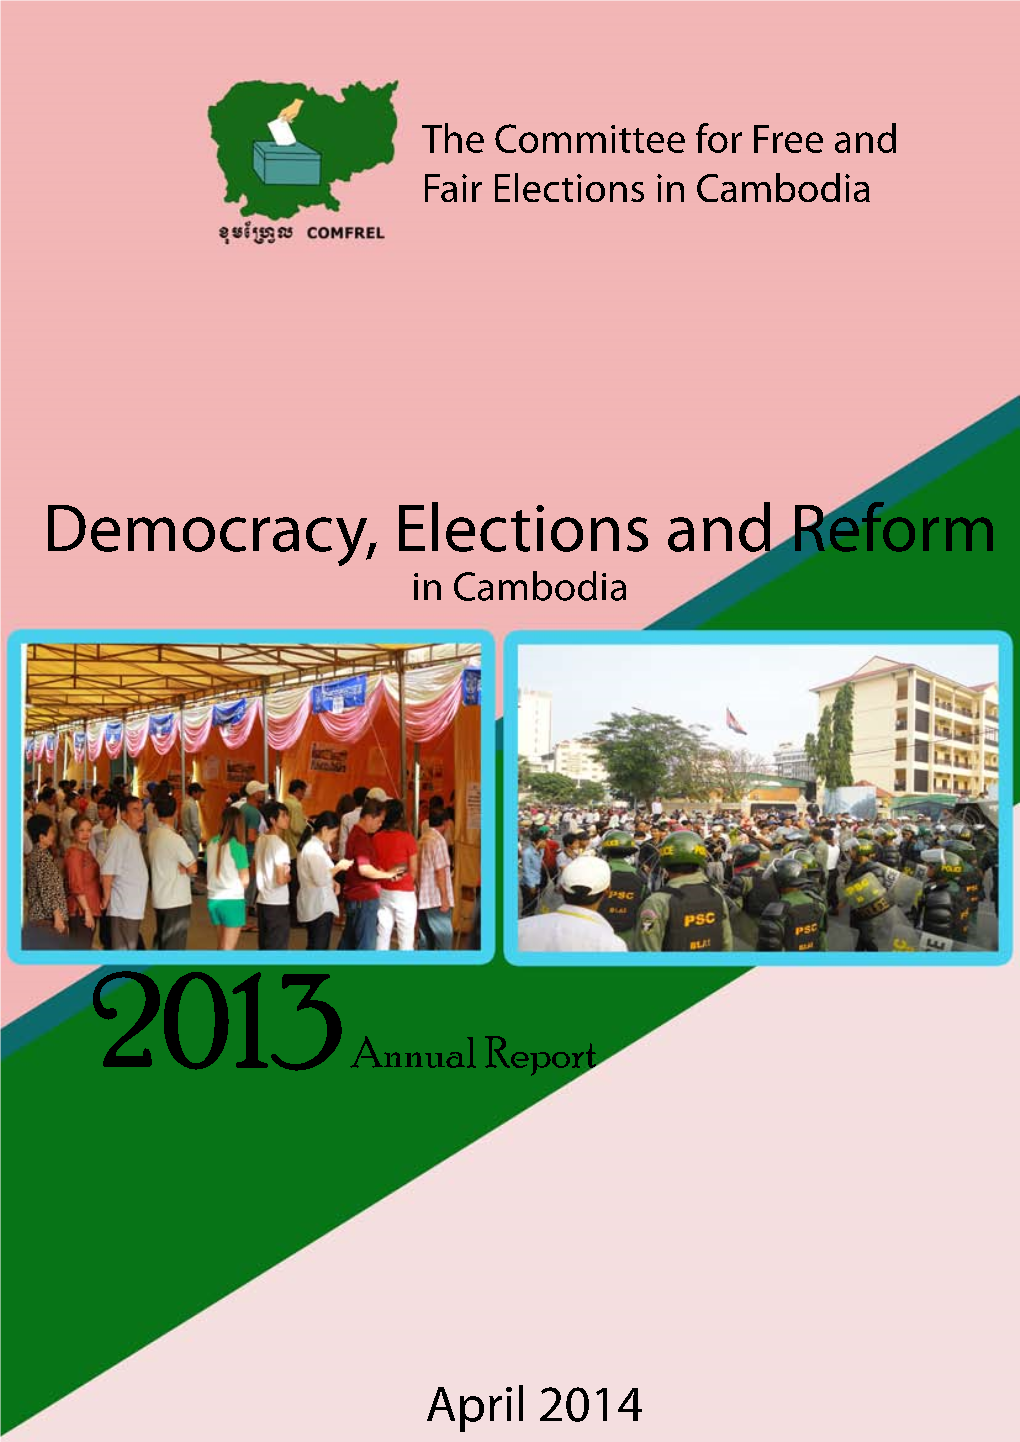 Democracy, Elections and Reform in Cambodia